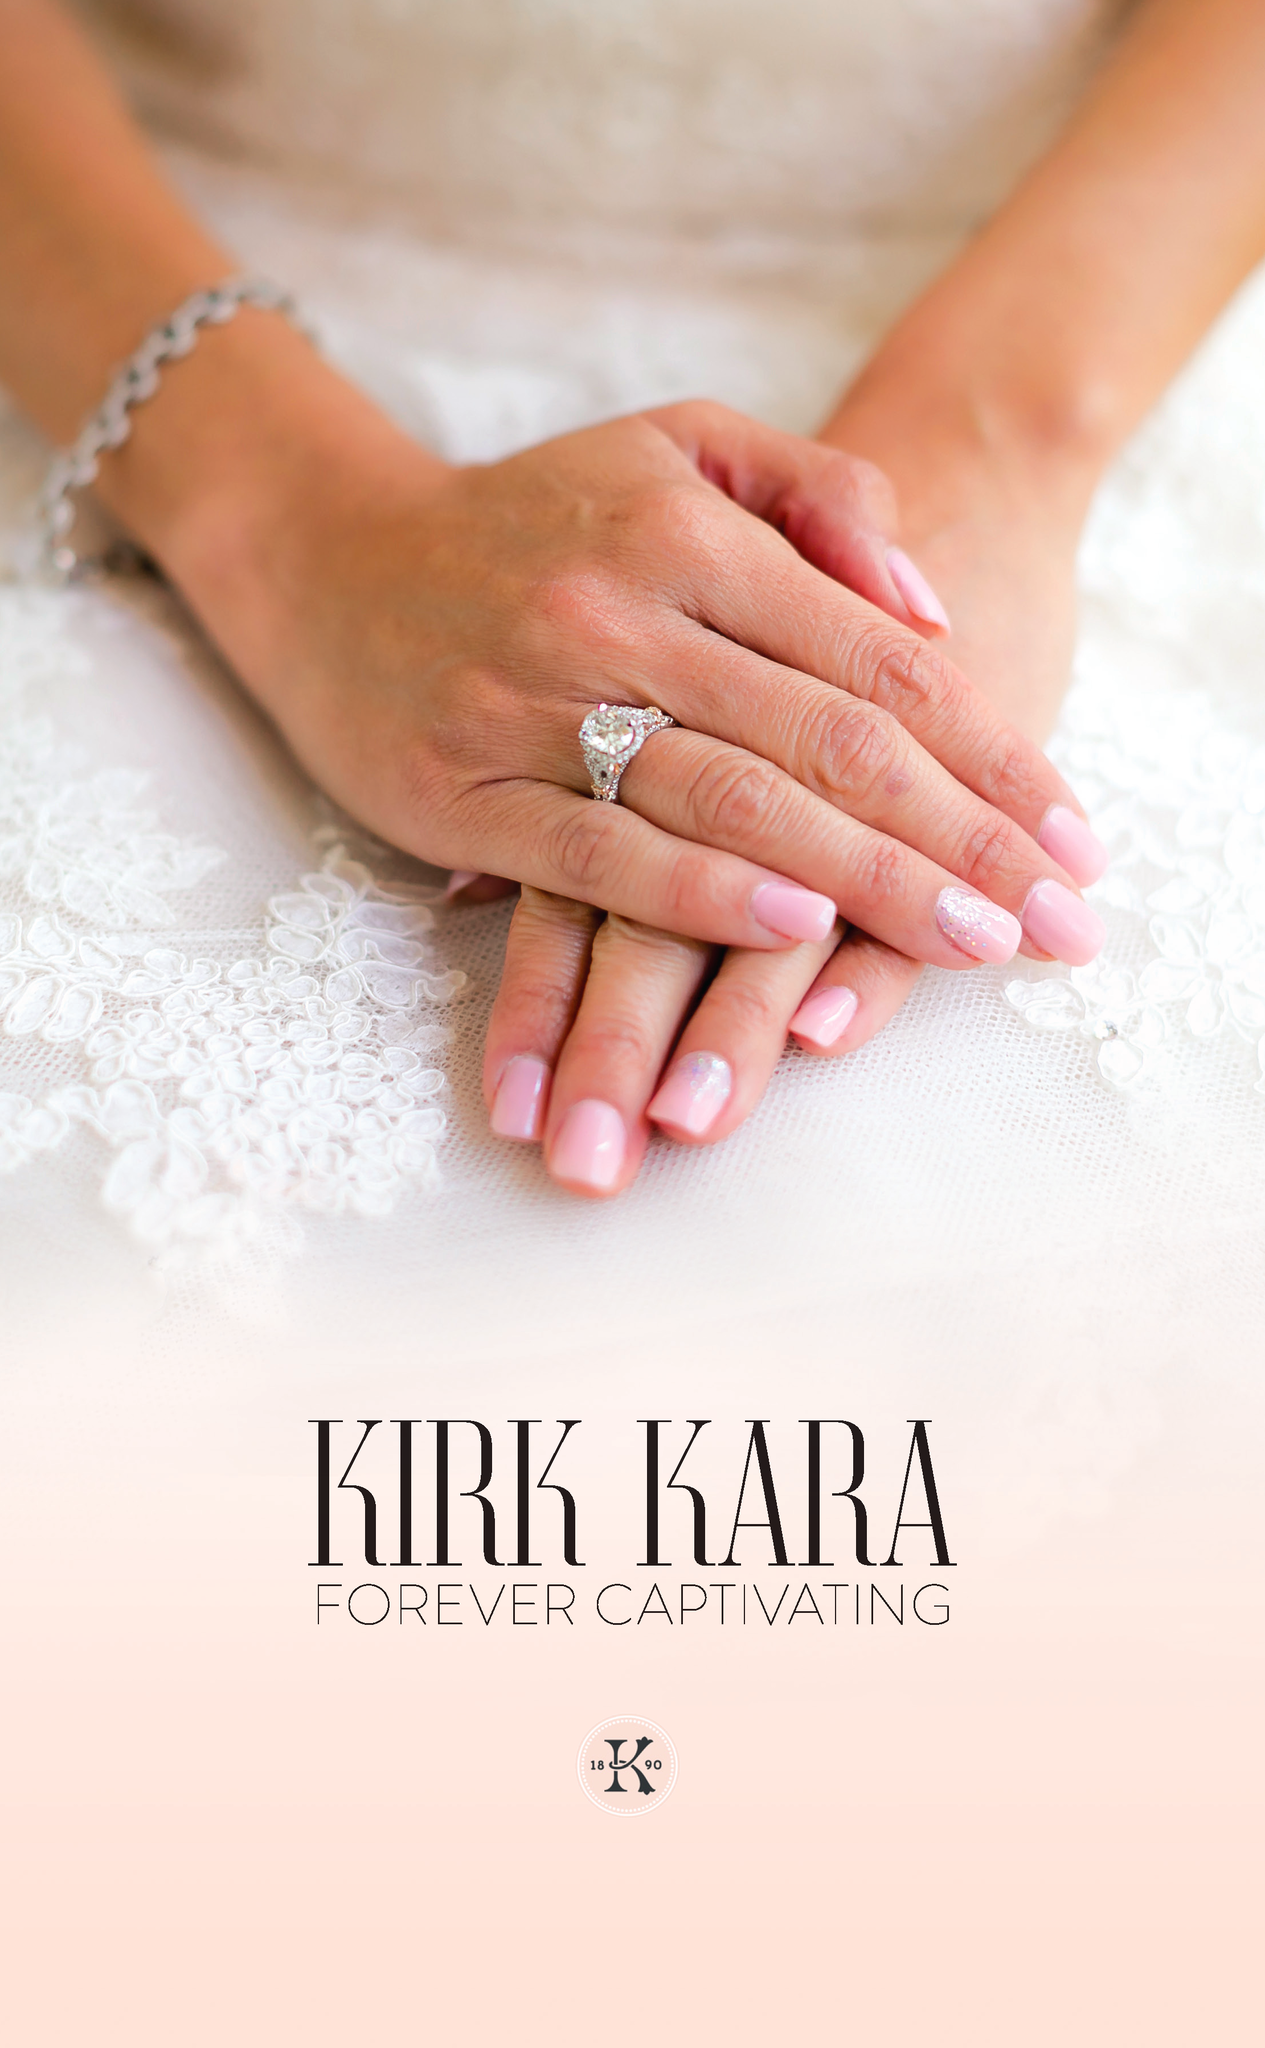 Kirk Kara poster with logo and Forever Captivating written at the bottom with a model resting her hands on her lap wearing Kirk Kara rings